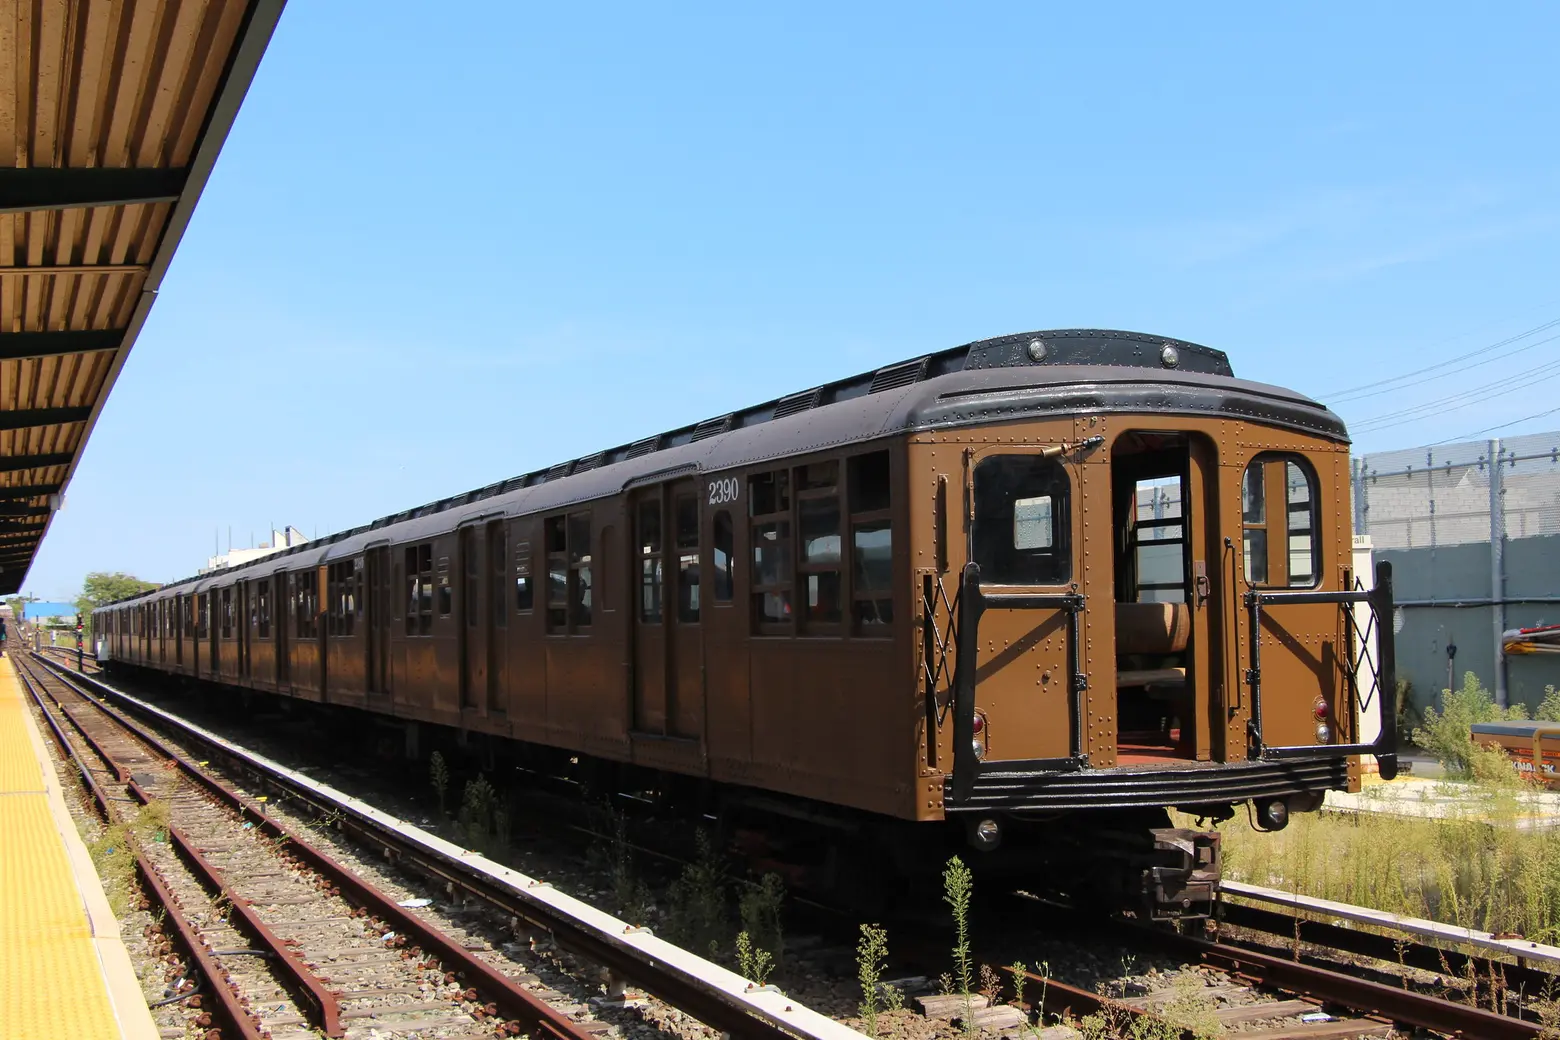 Nostalgia trains to roll into Coney Island this weekend